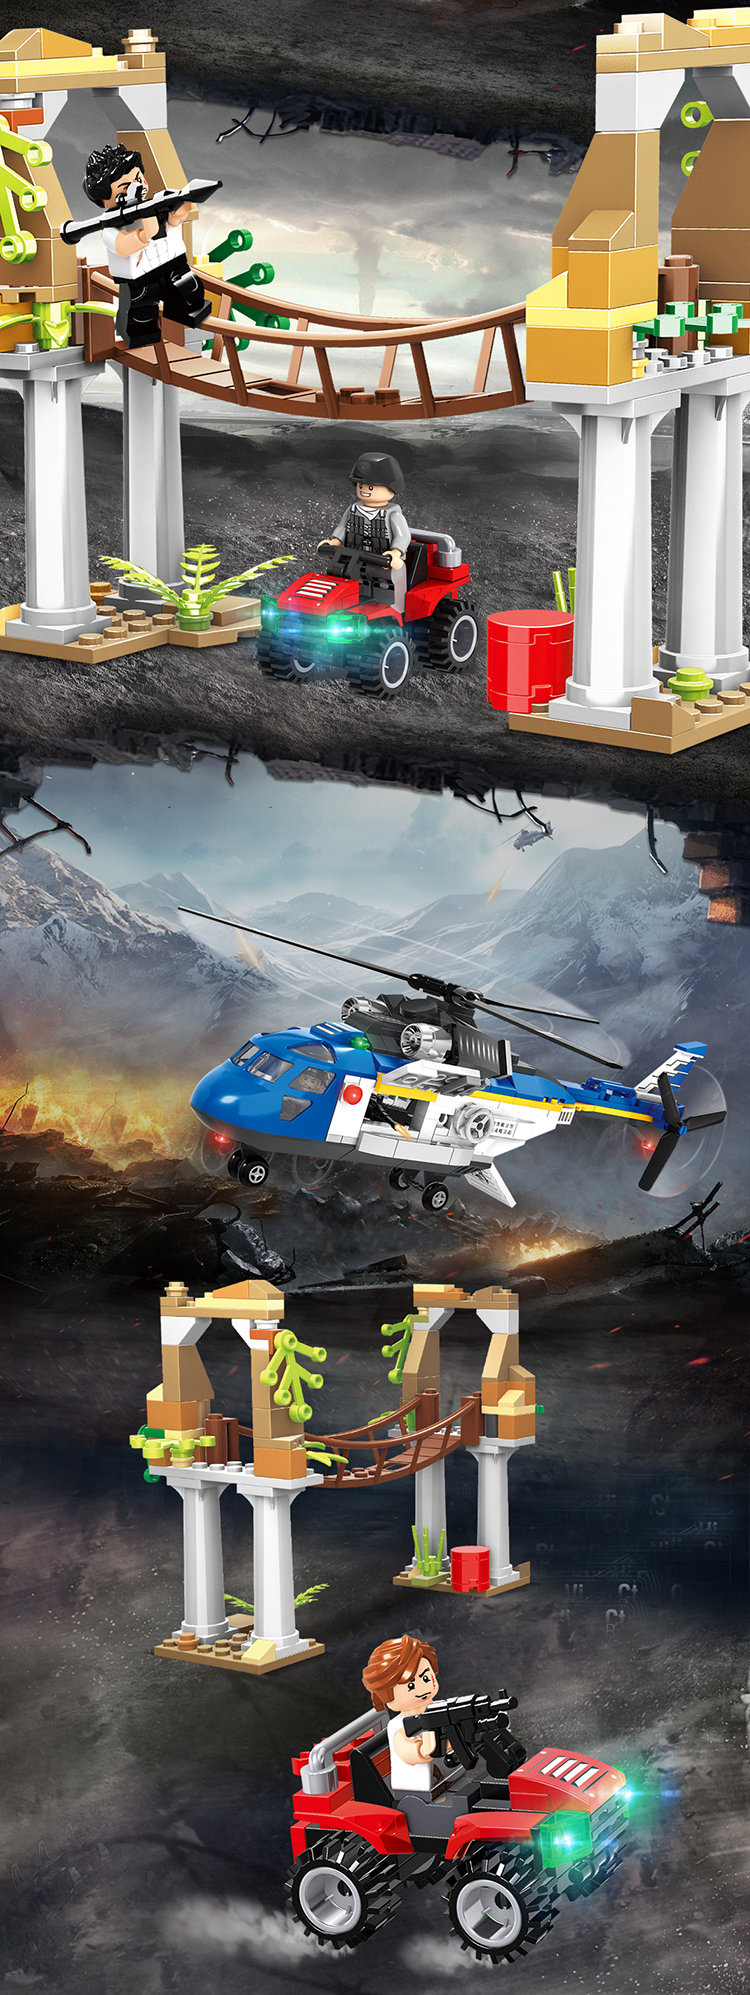 WOMA TOYS AliExpress hot sale City Police Army Battleground Attack helicopter small Building Blocks Bricks toys model